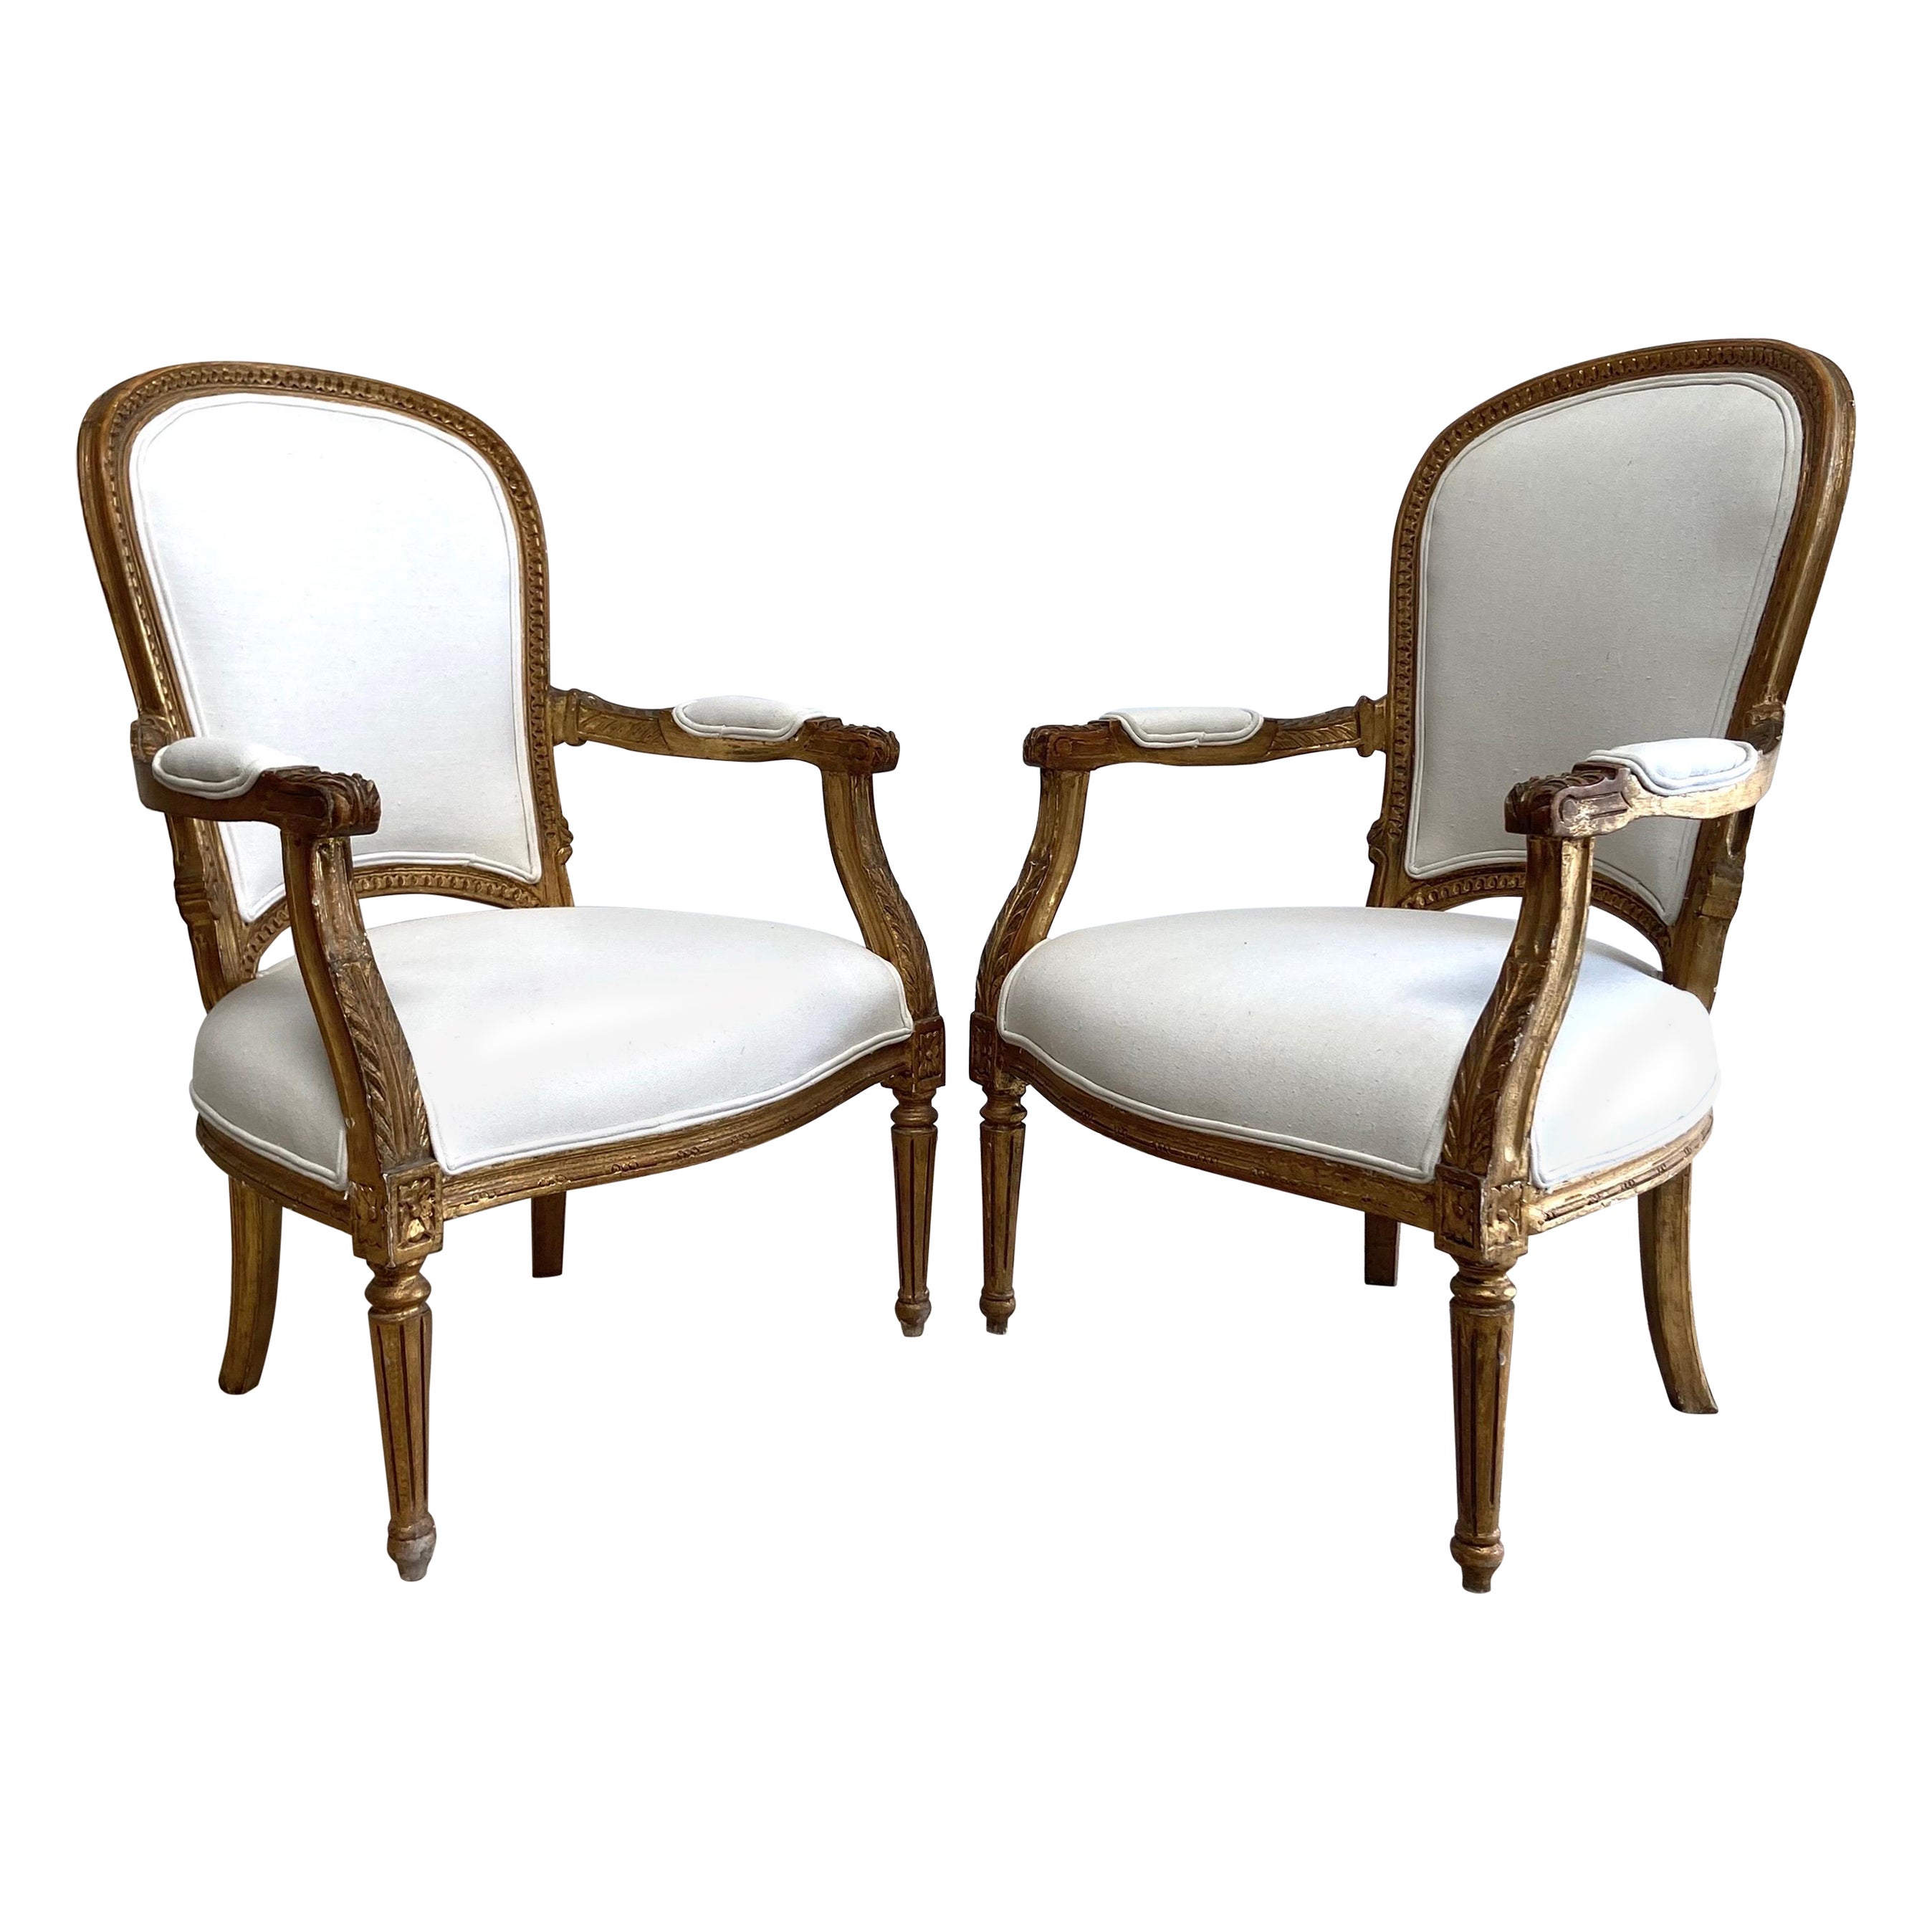 Vintage French Style Louis XVI Open Arm Chairs with Linen Upholstery